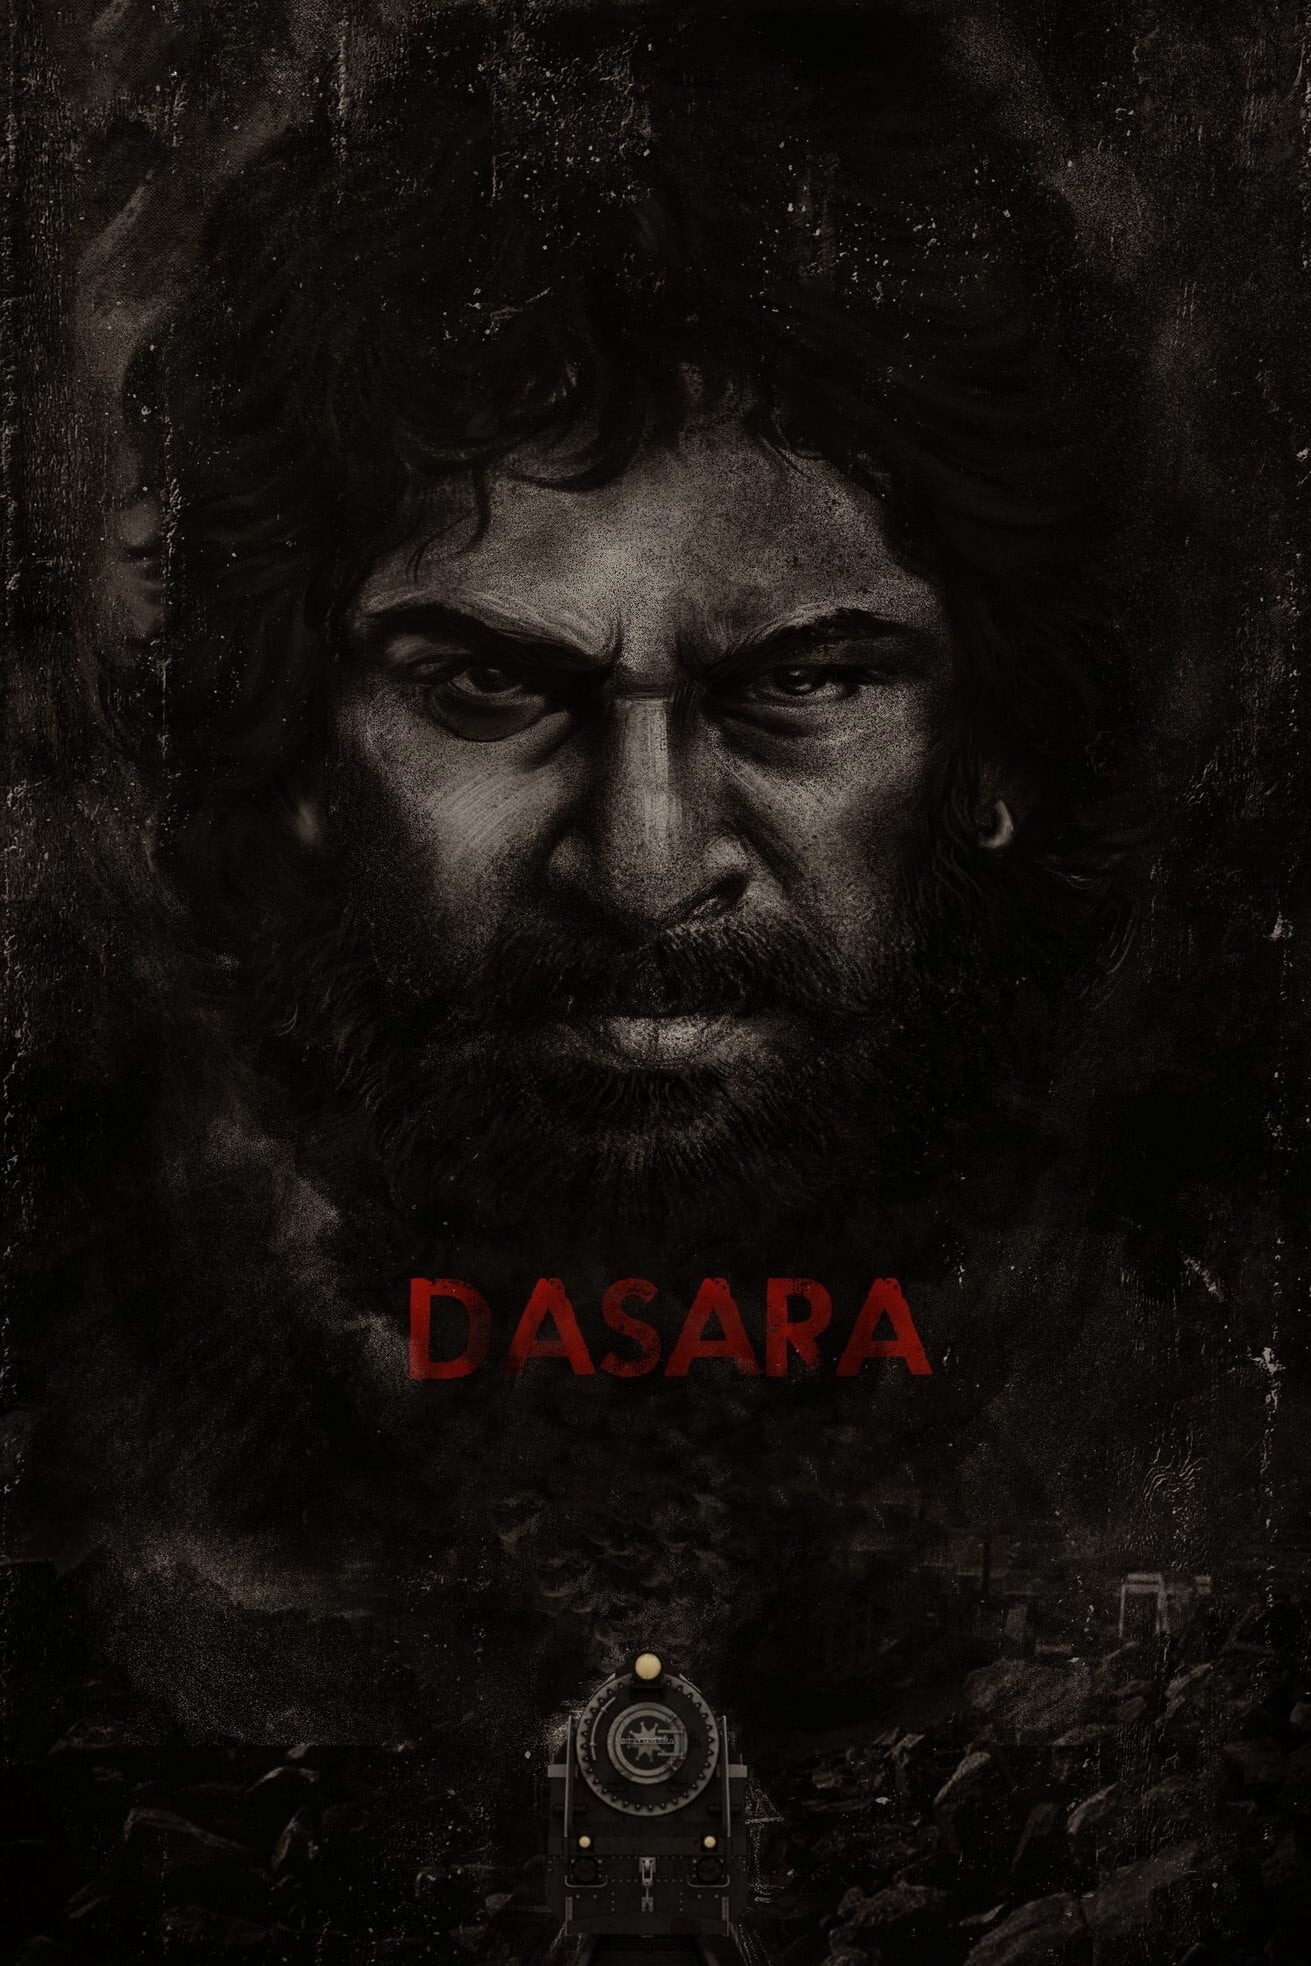 Poster for the movie "Dasara"